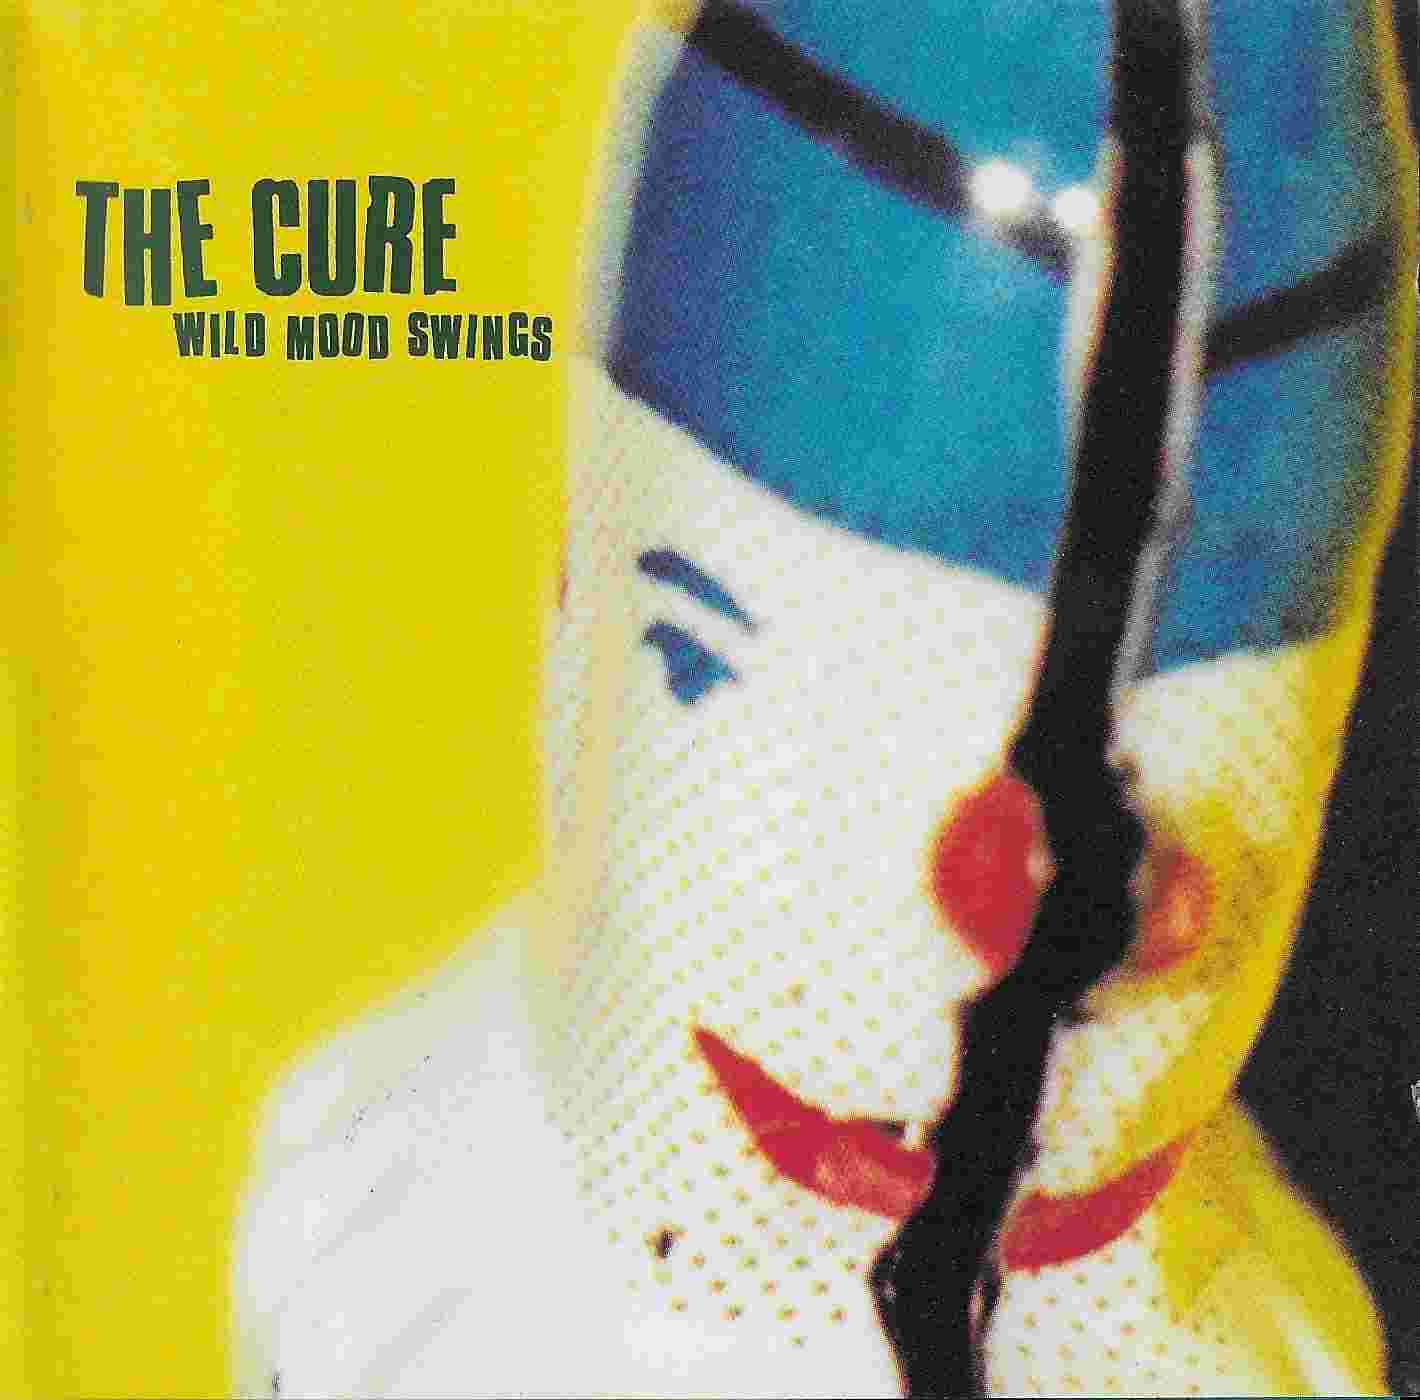 Picture of Wild mood swings by artist The Cure 